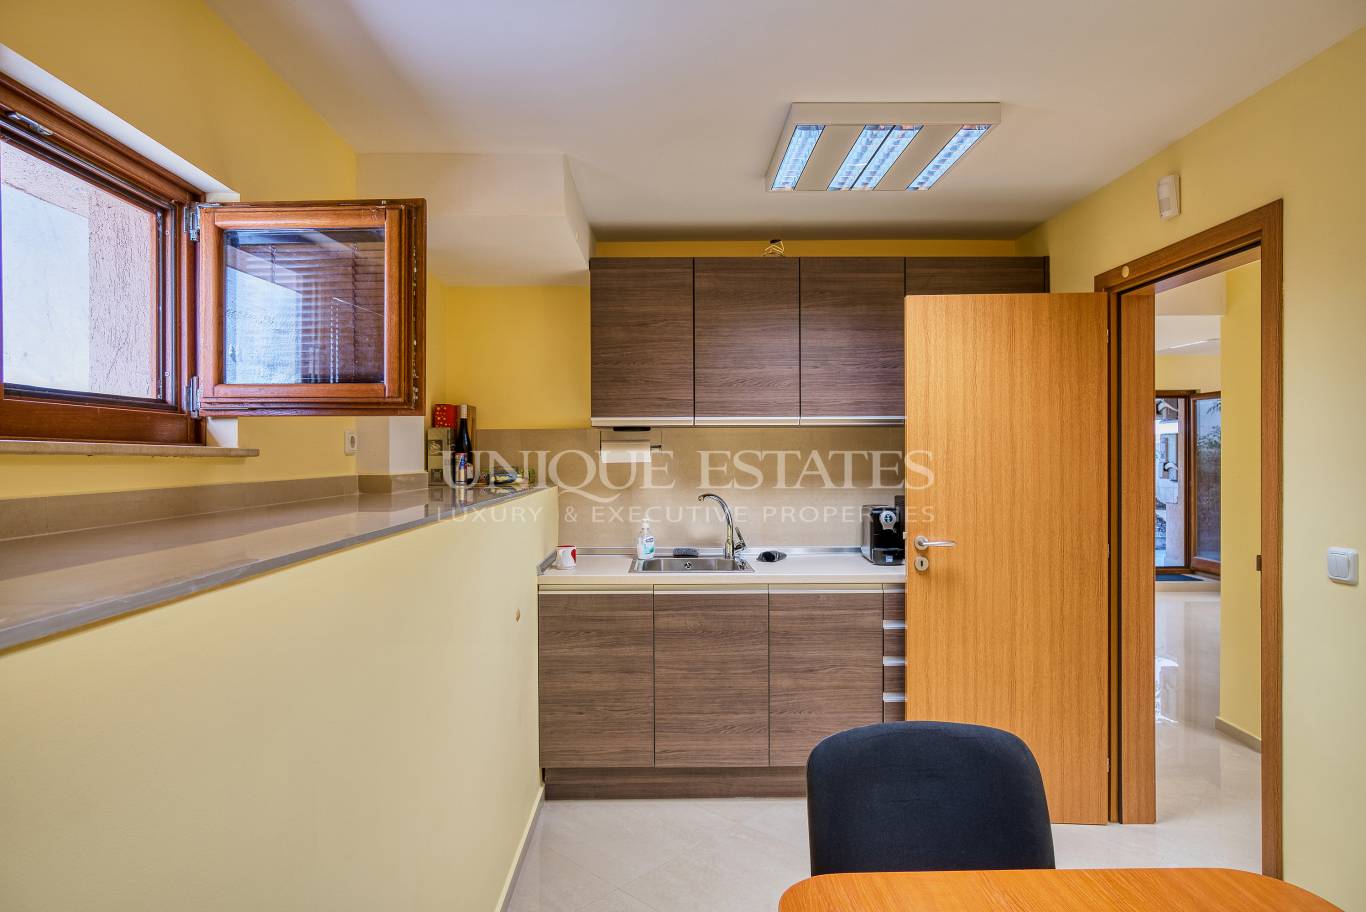 Office for sale in Sofia, Downtown with listing ID: K14097 - image 8